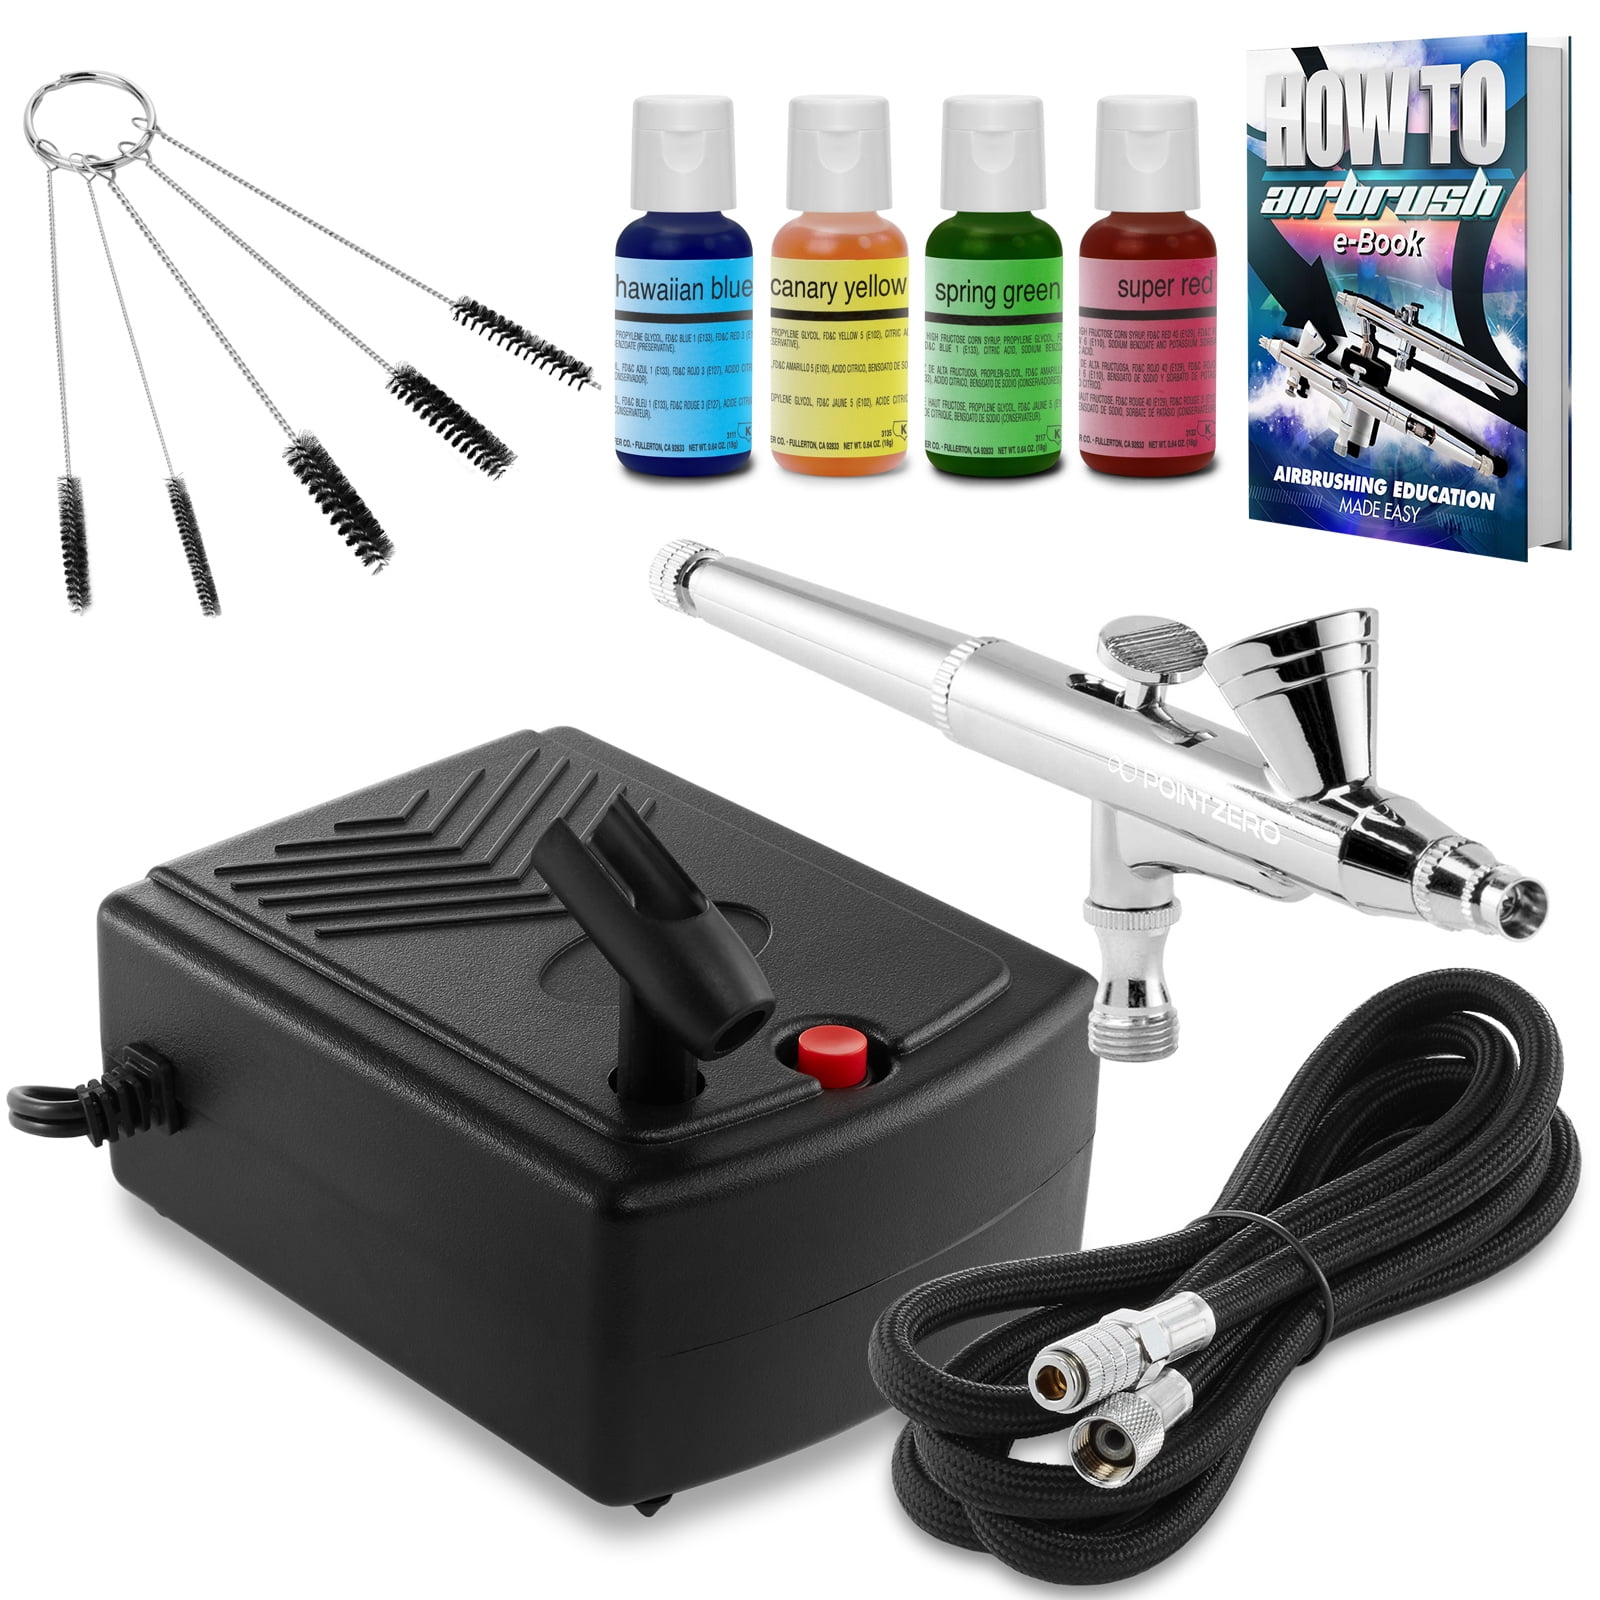 Cake Airbrush Decorating Kit - 3 Airbrushes, Compressor & Paint, 9 x 9 -  King Soopers